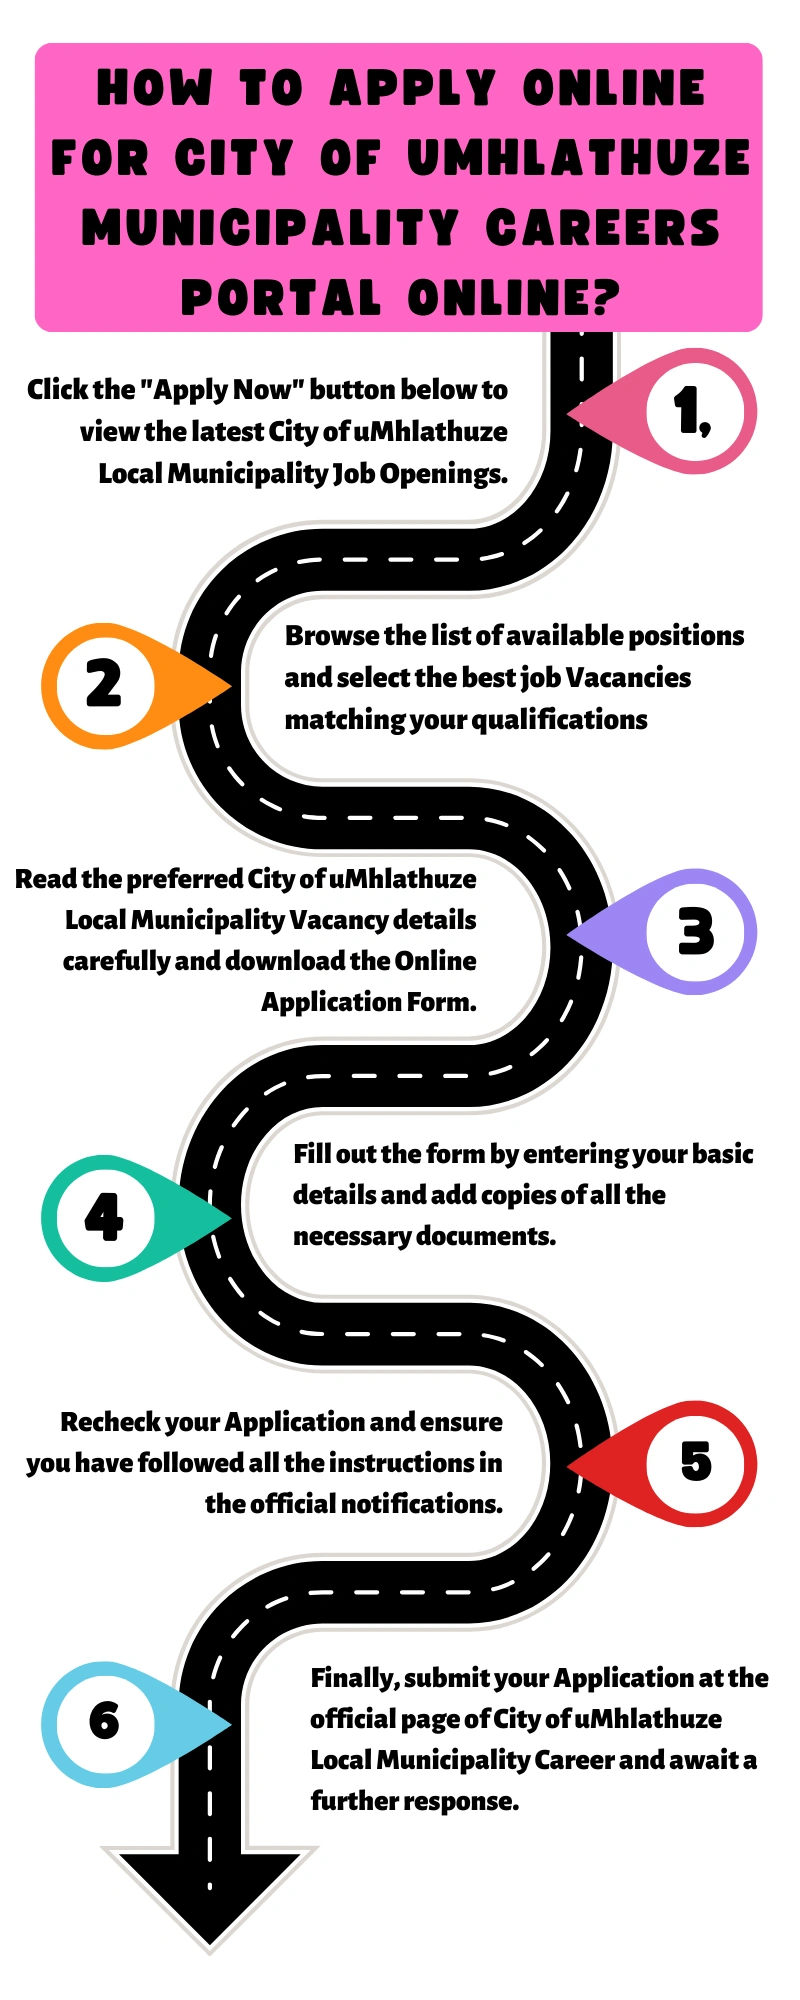 How to Apply online for City of uMhlathuze Municipality Careers Portal Online?